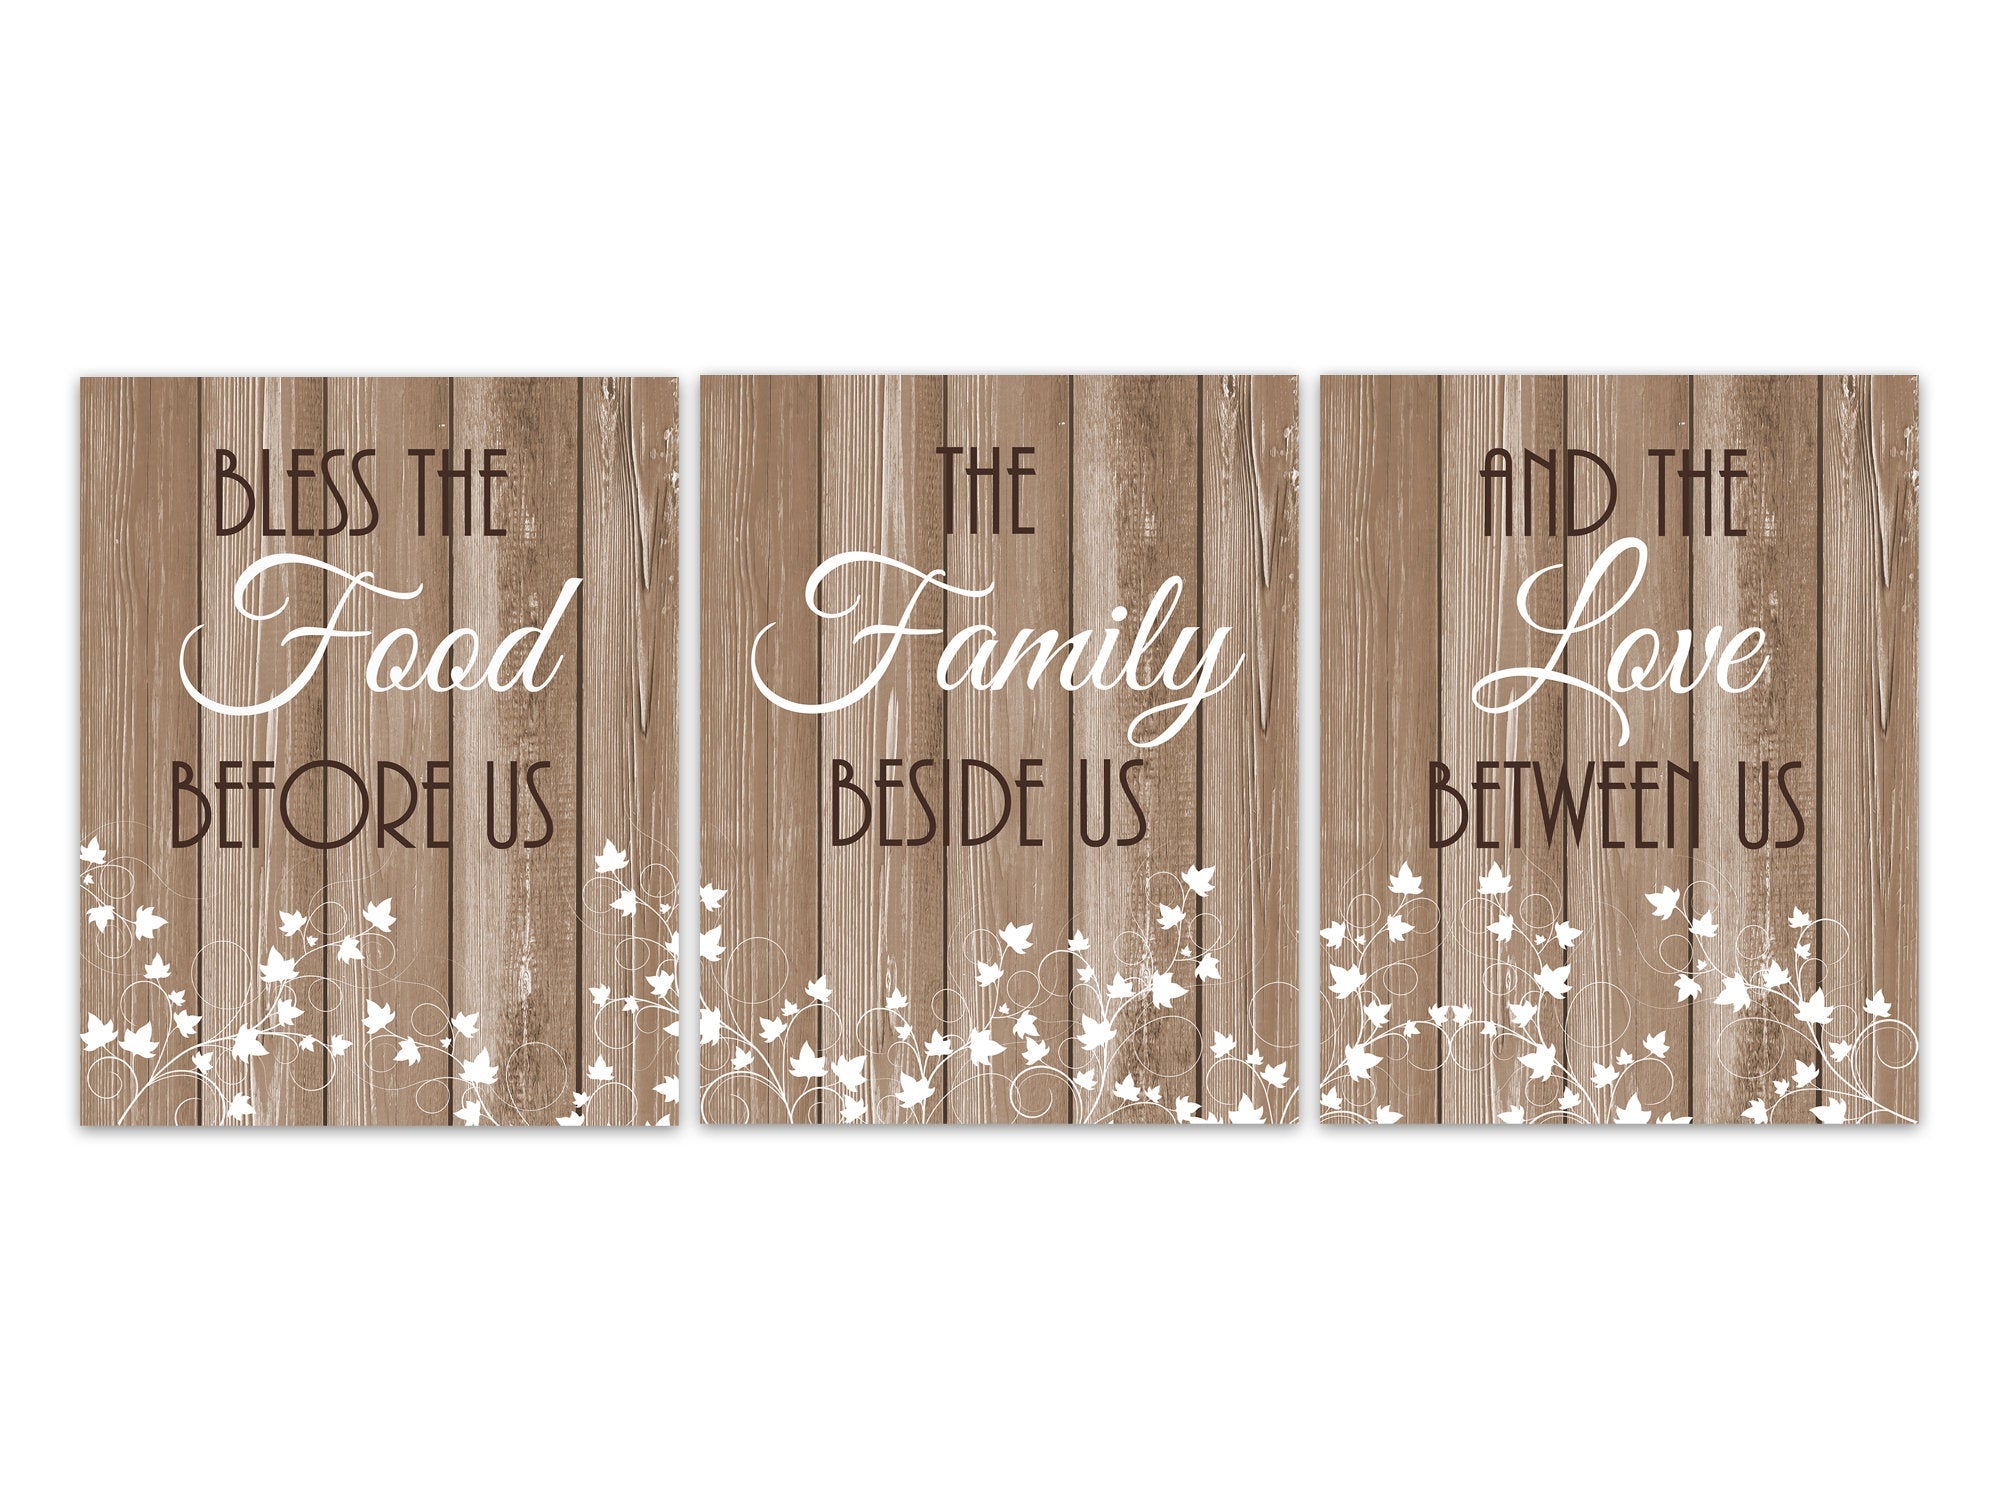 Brown Rustic Kitchen CANVAS or PRINTS, Bless The Food Signs, Kitchen Quote Art, Ivy Kitchen Decor, Farmhouse Dining Room Pictures - HOME353